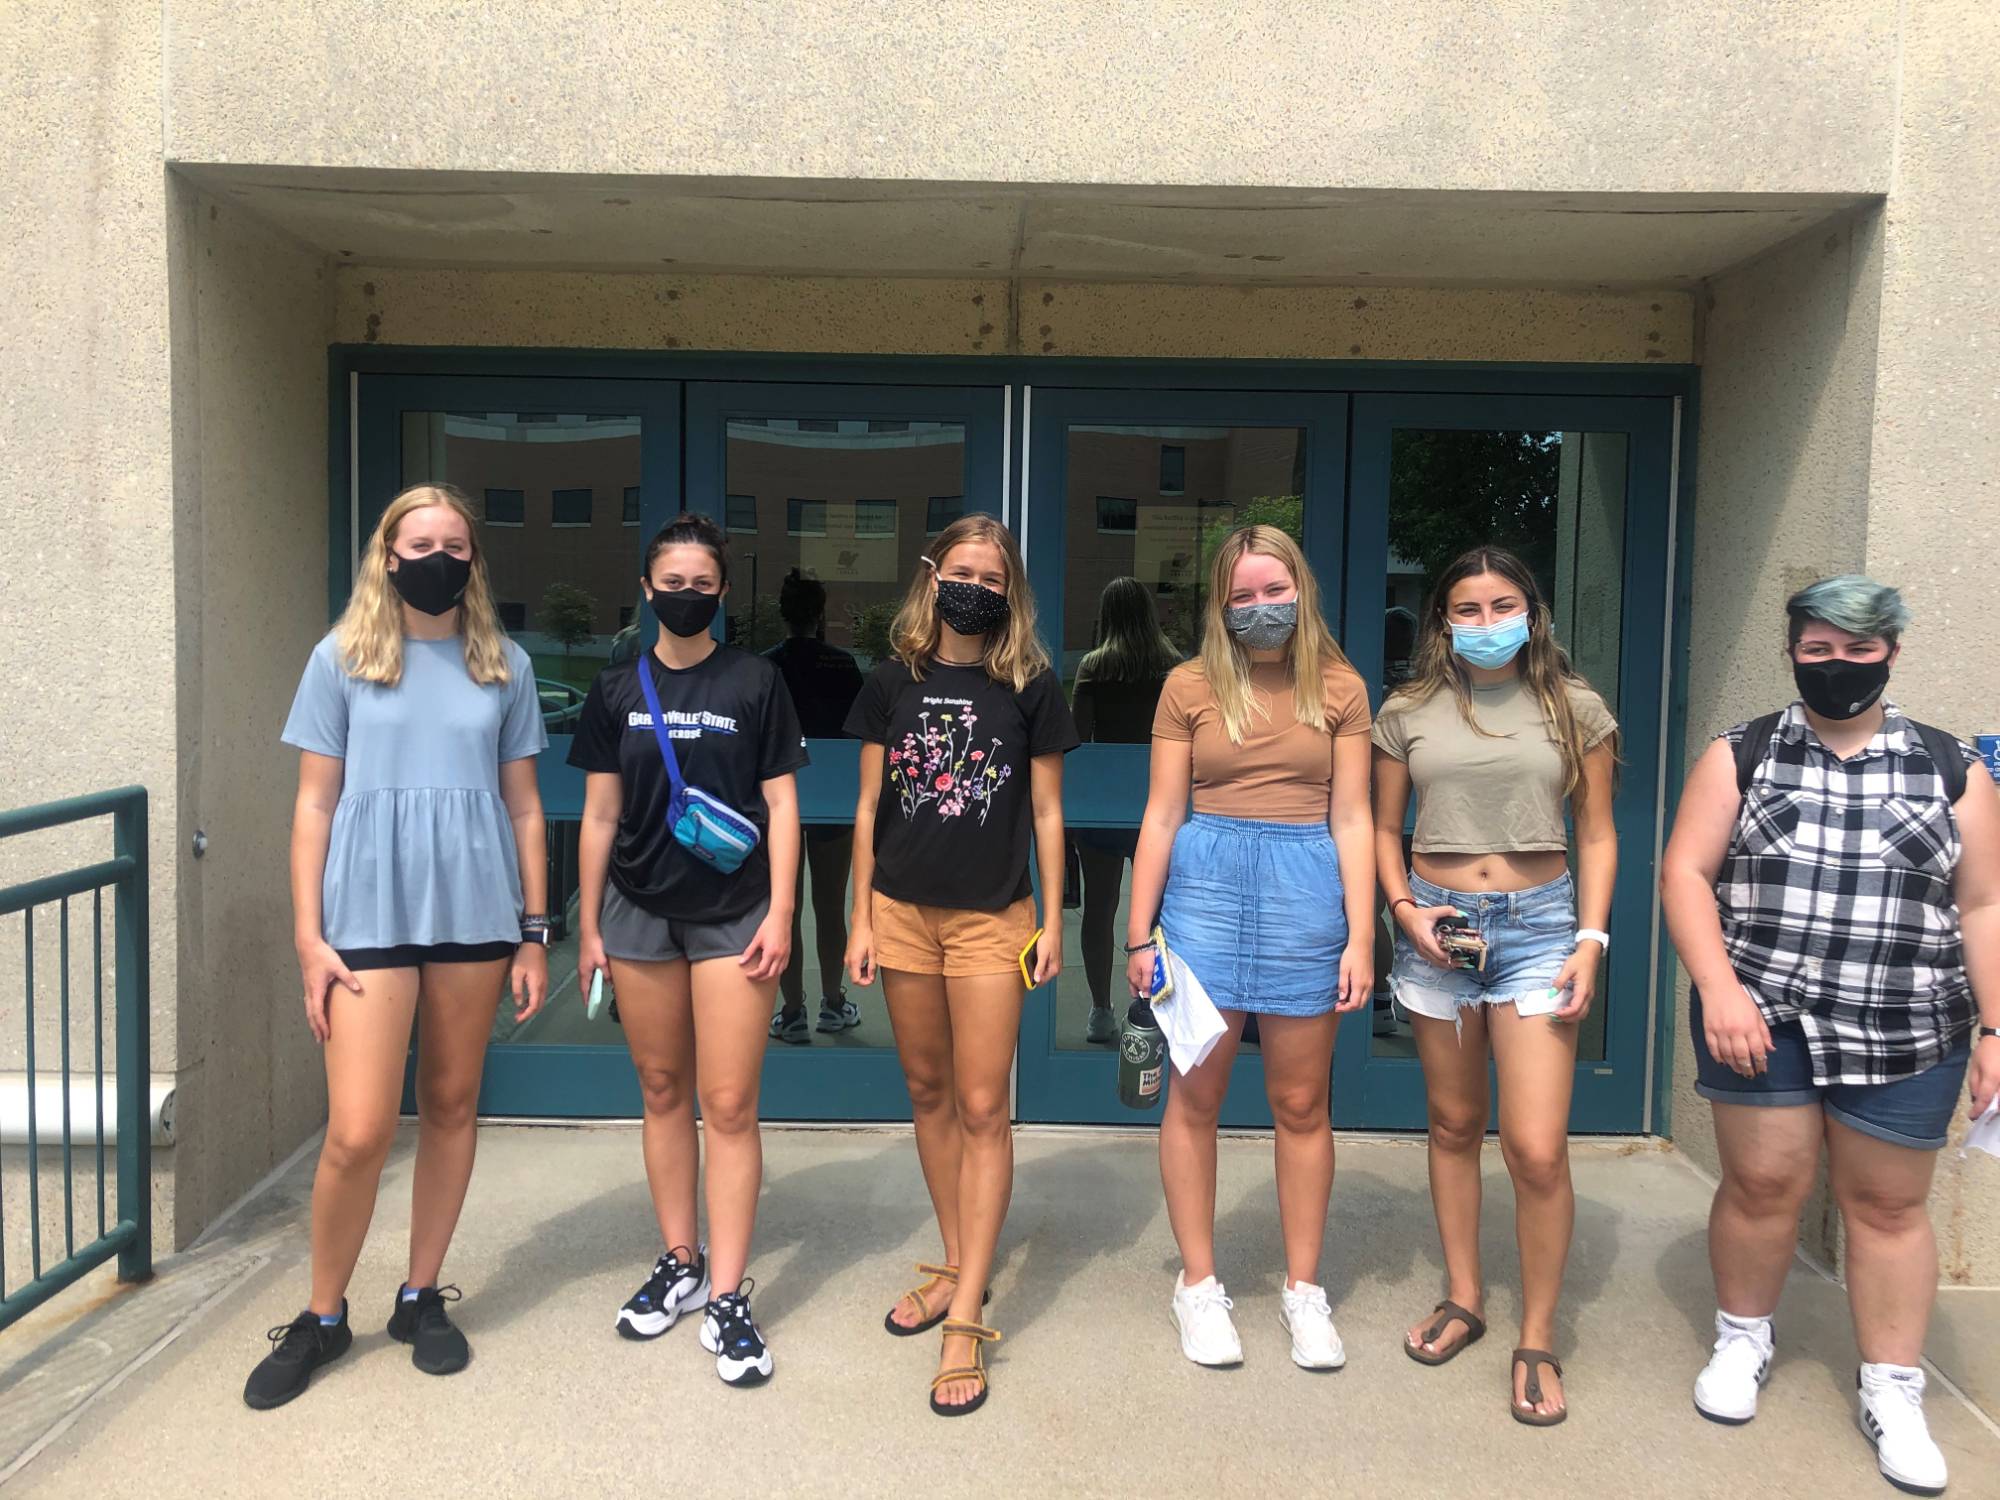 Mentor group standing with masks on